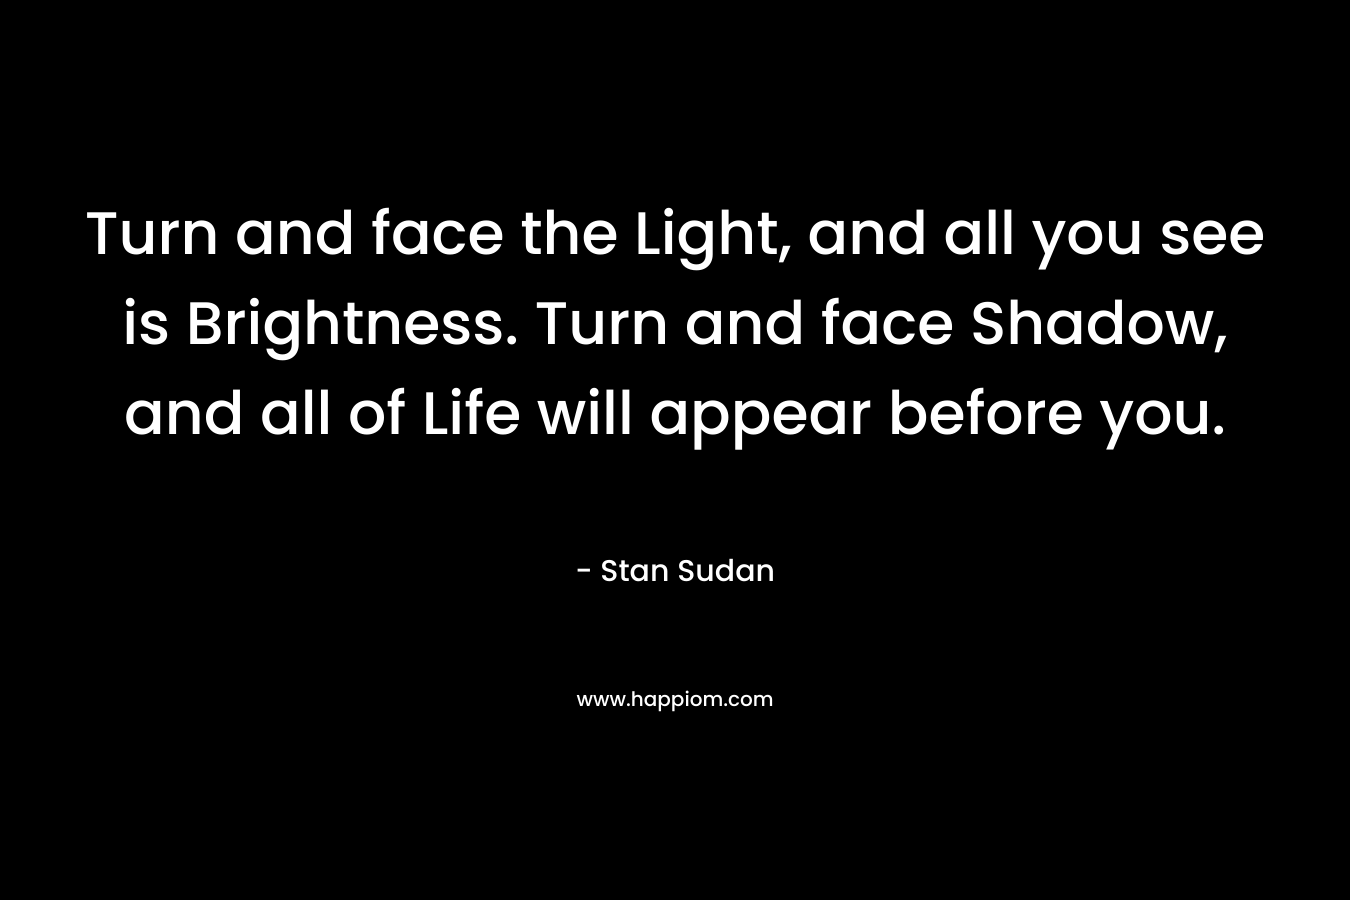 Turn and face the Light, and all you see is Brightness. Turn and face Shadow, and all of Life will appear before you.